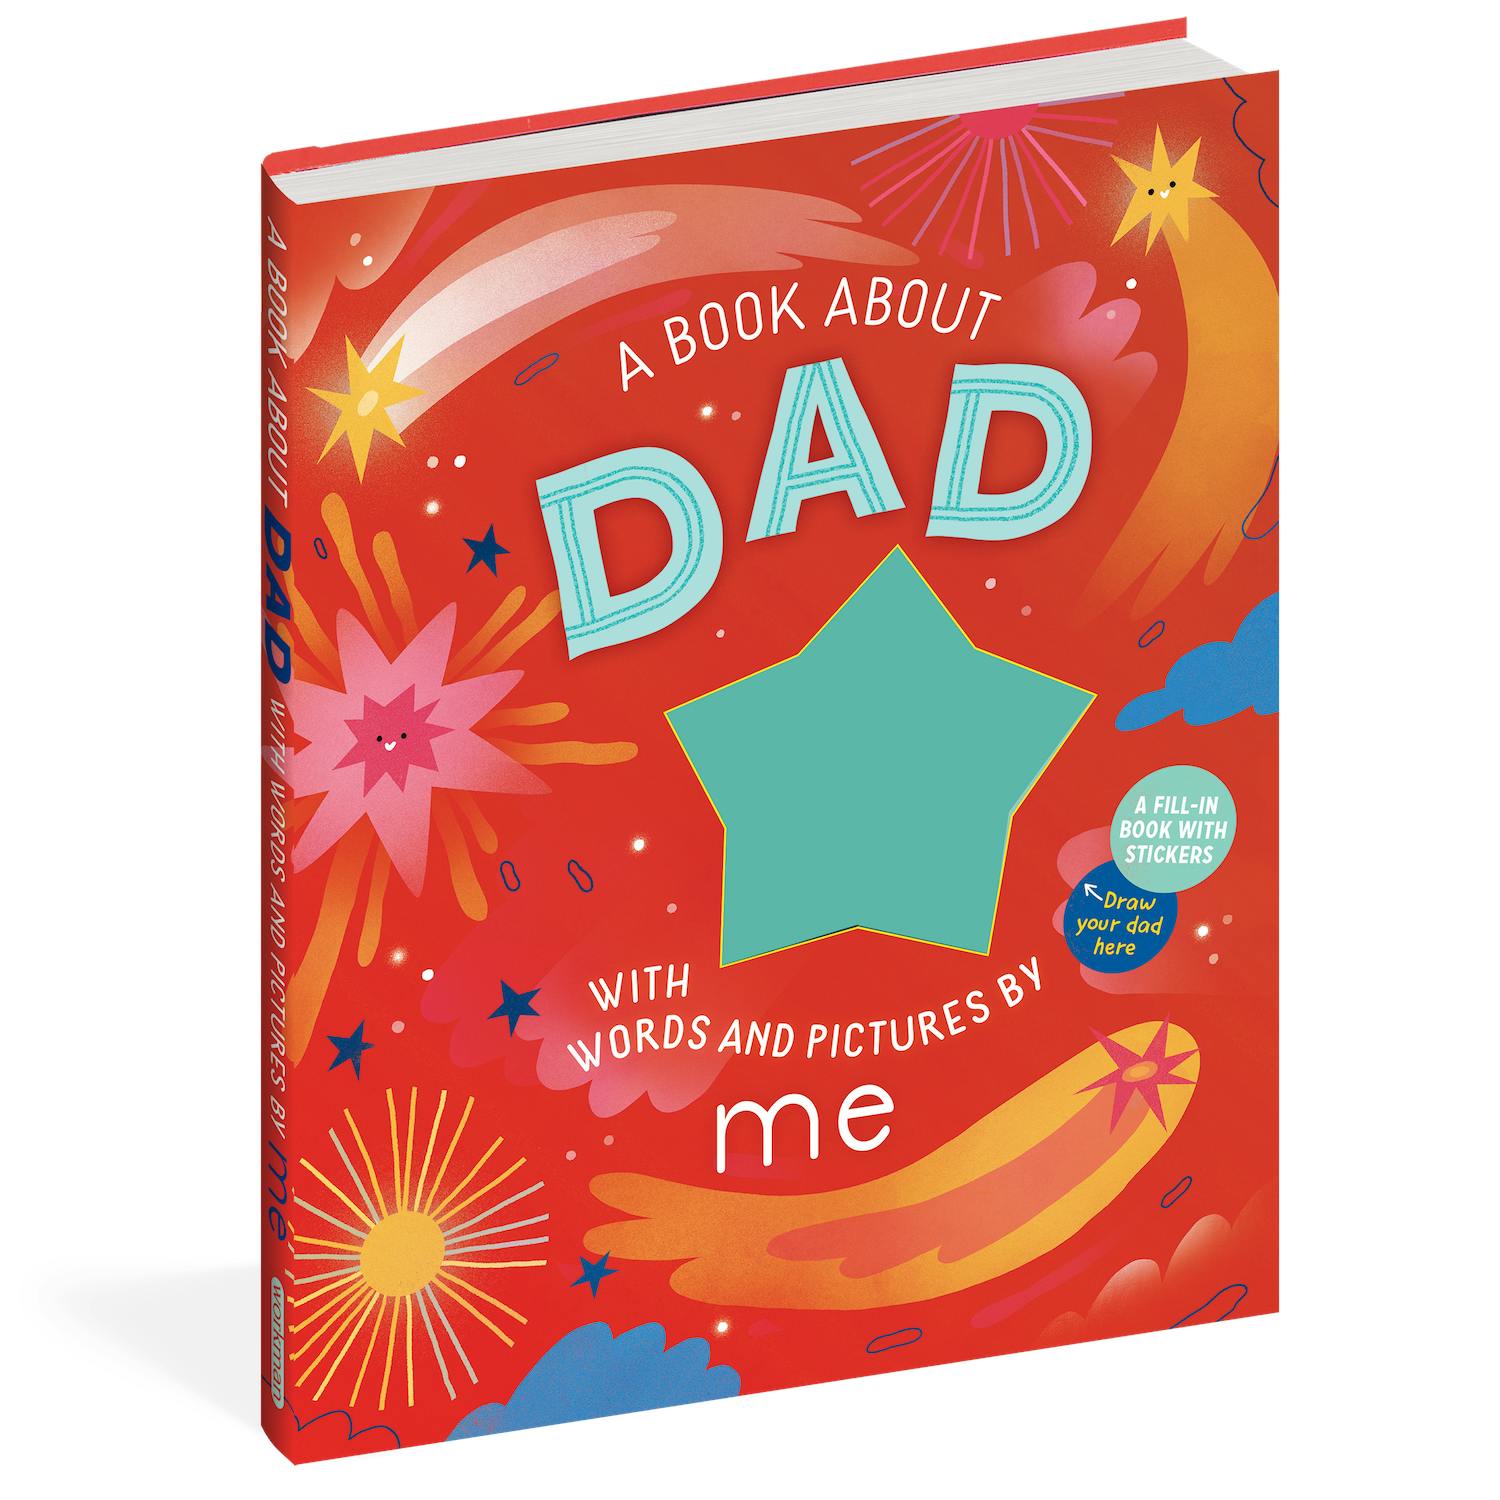 Workman Publishing A Book about Dad with Words and Pictures by Me